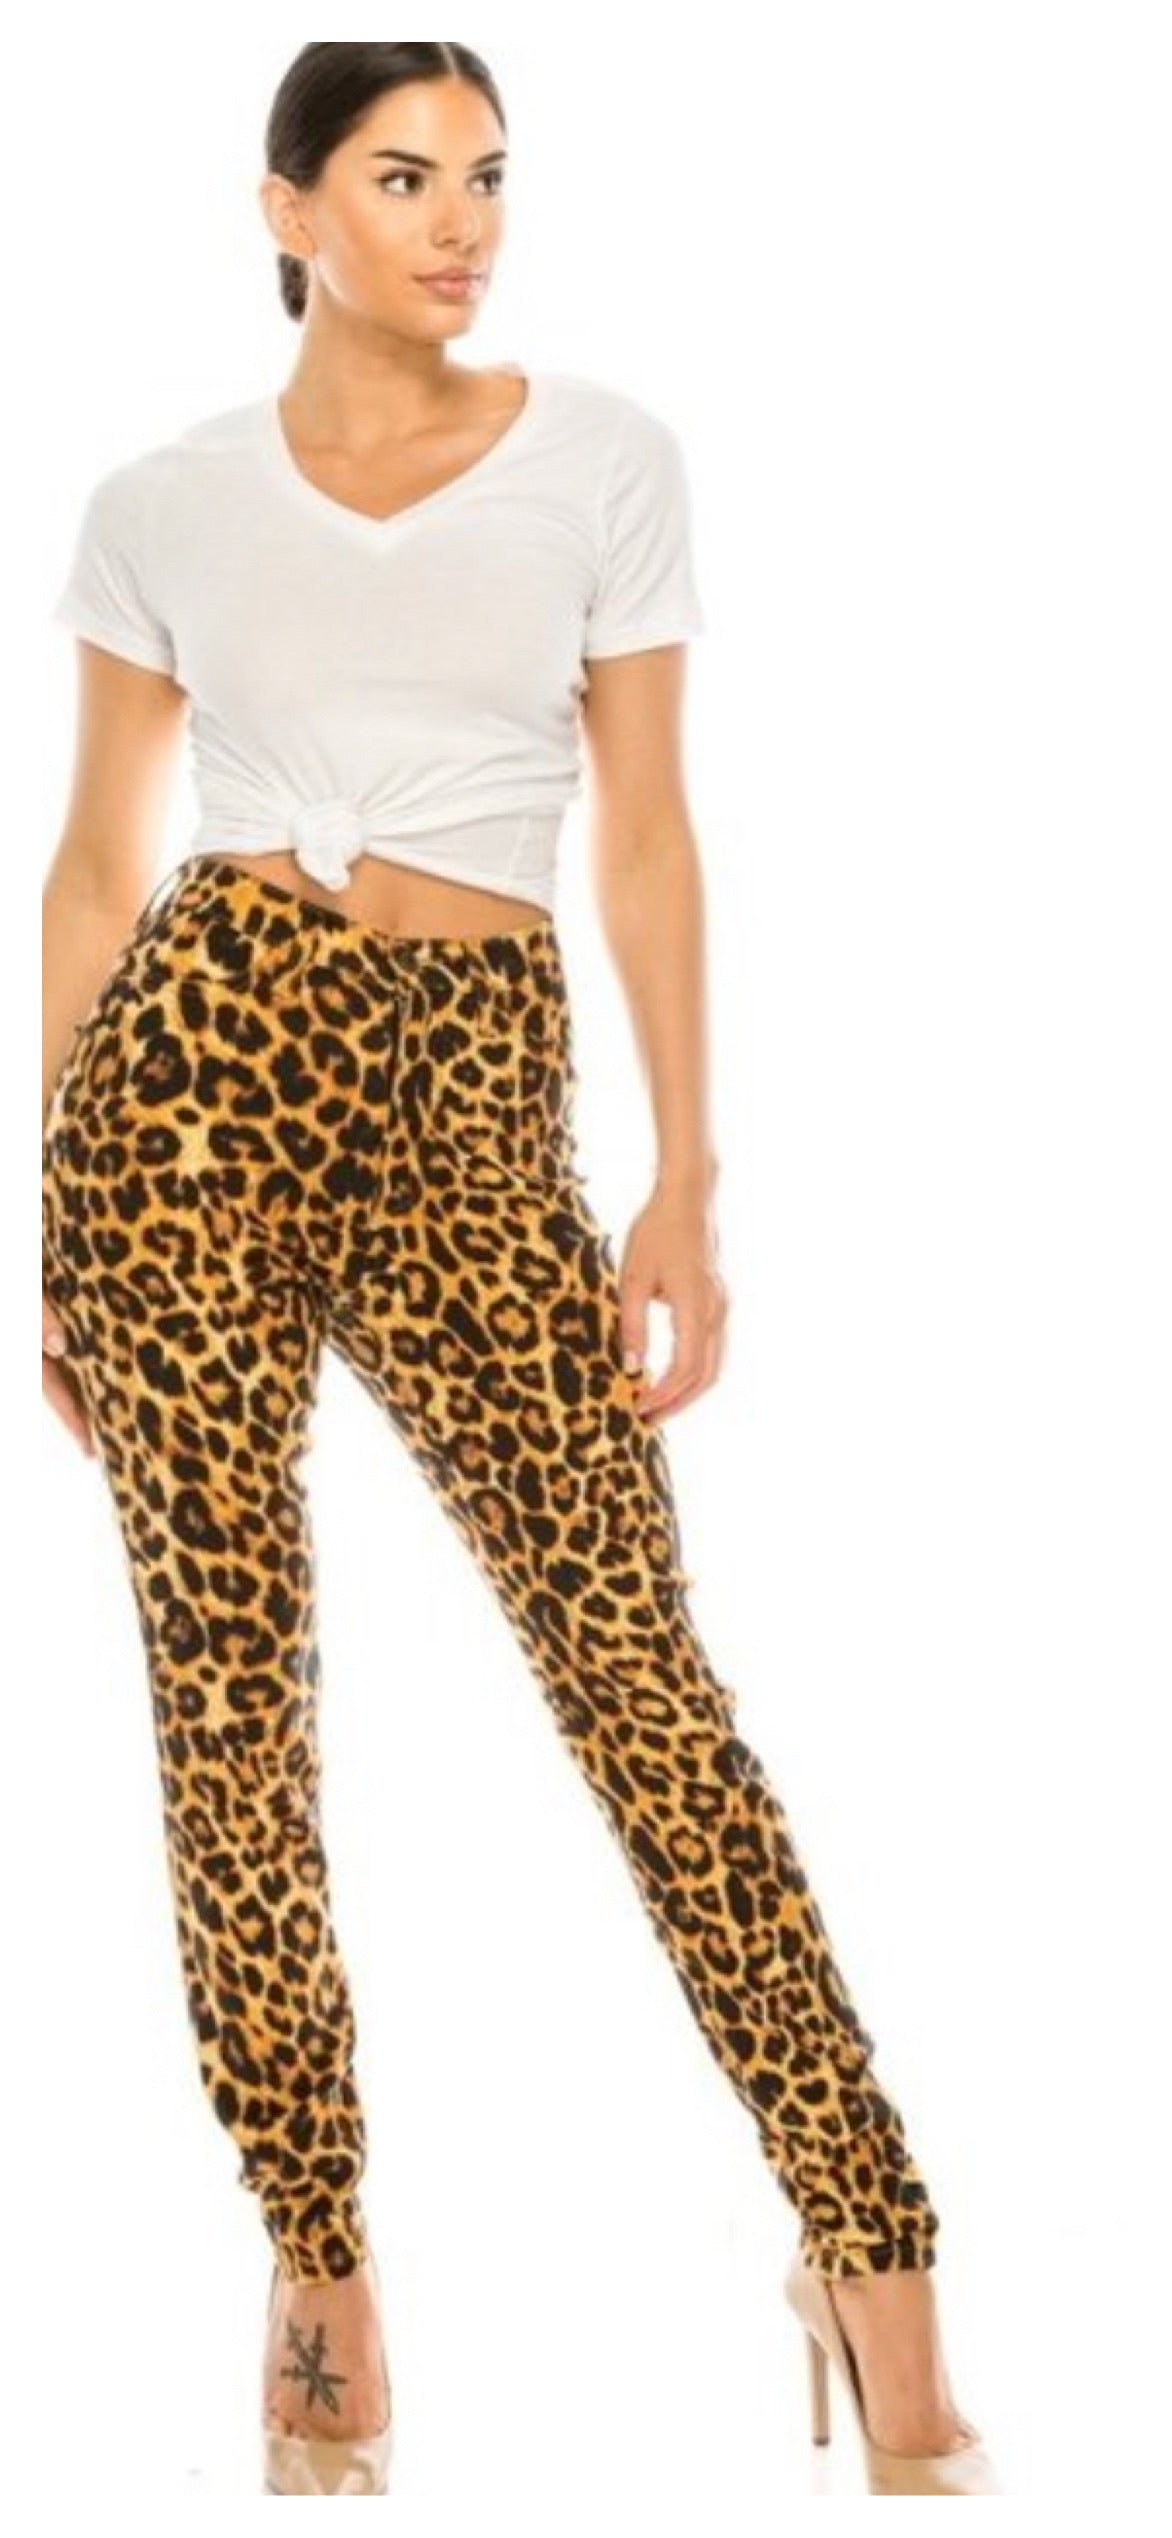 Bring out the Leopard High Waist Jeans